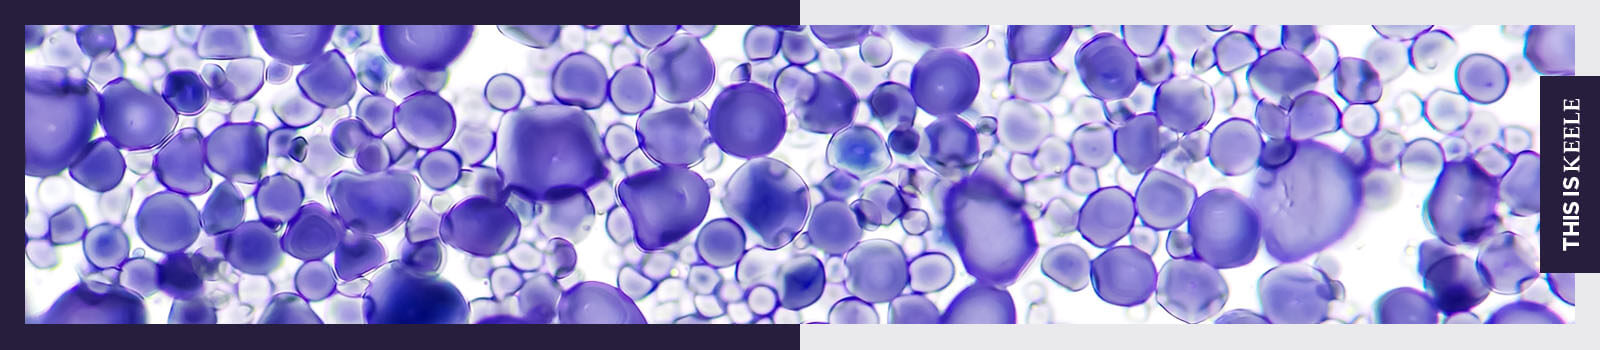 Cells under a microscope